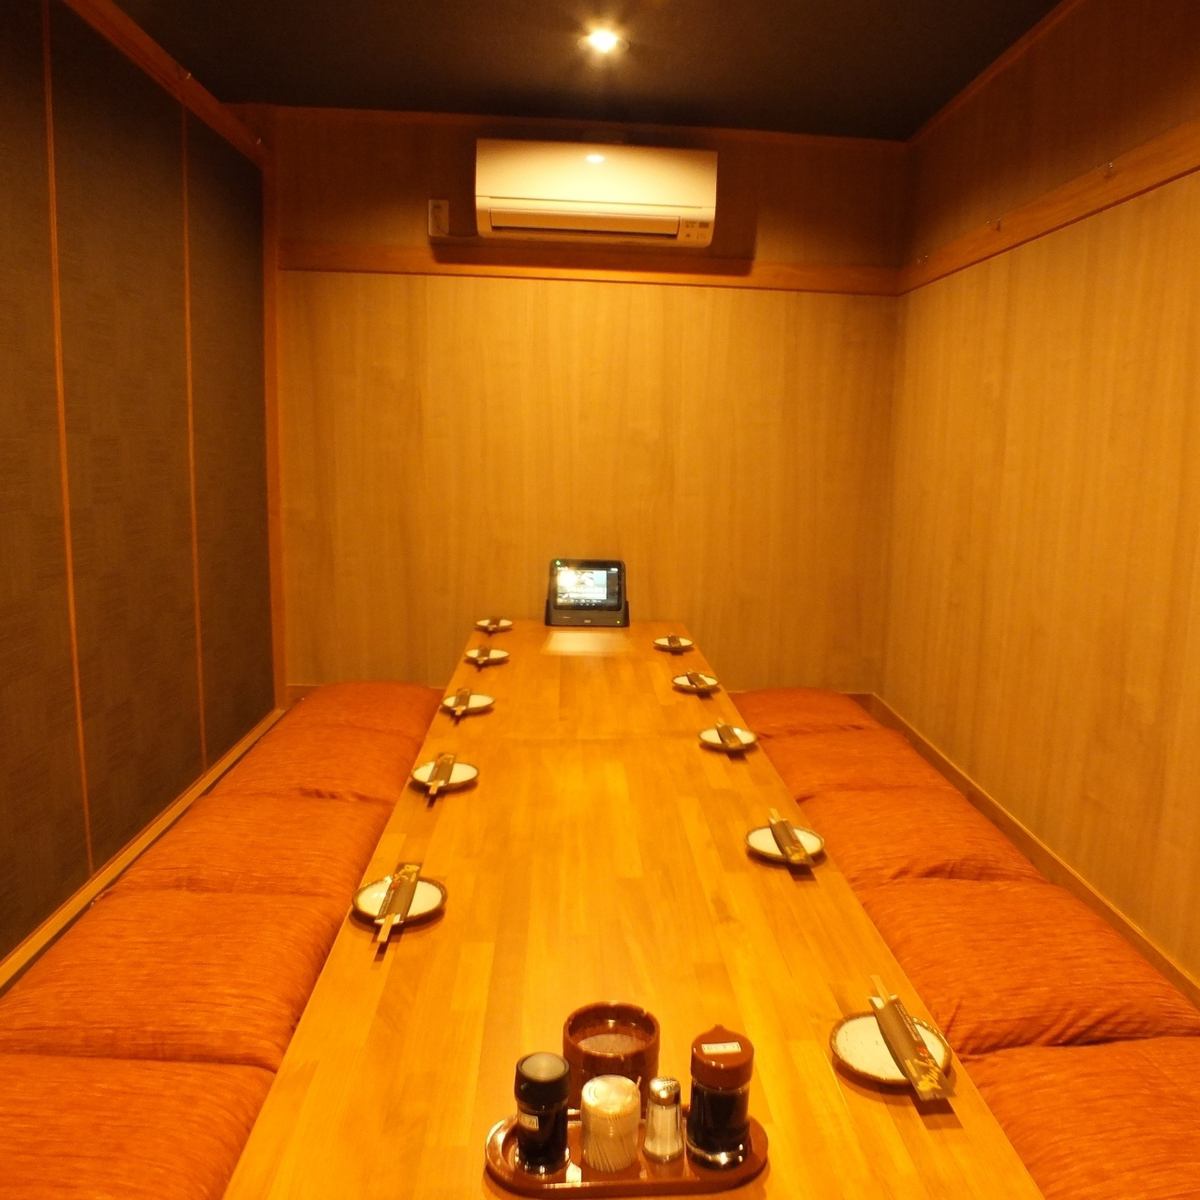 Great benefits for 10 people or more !! Large private room for up to 32 people